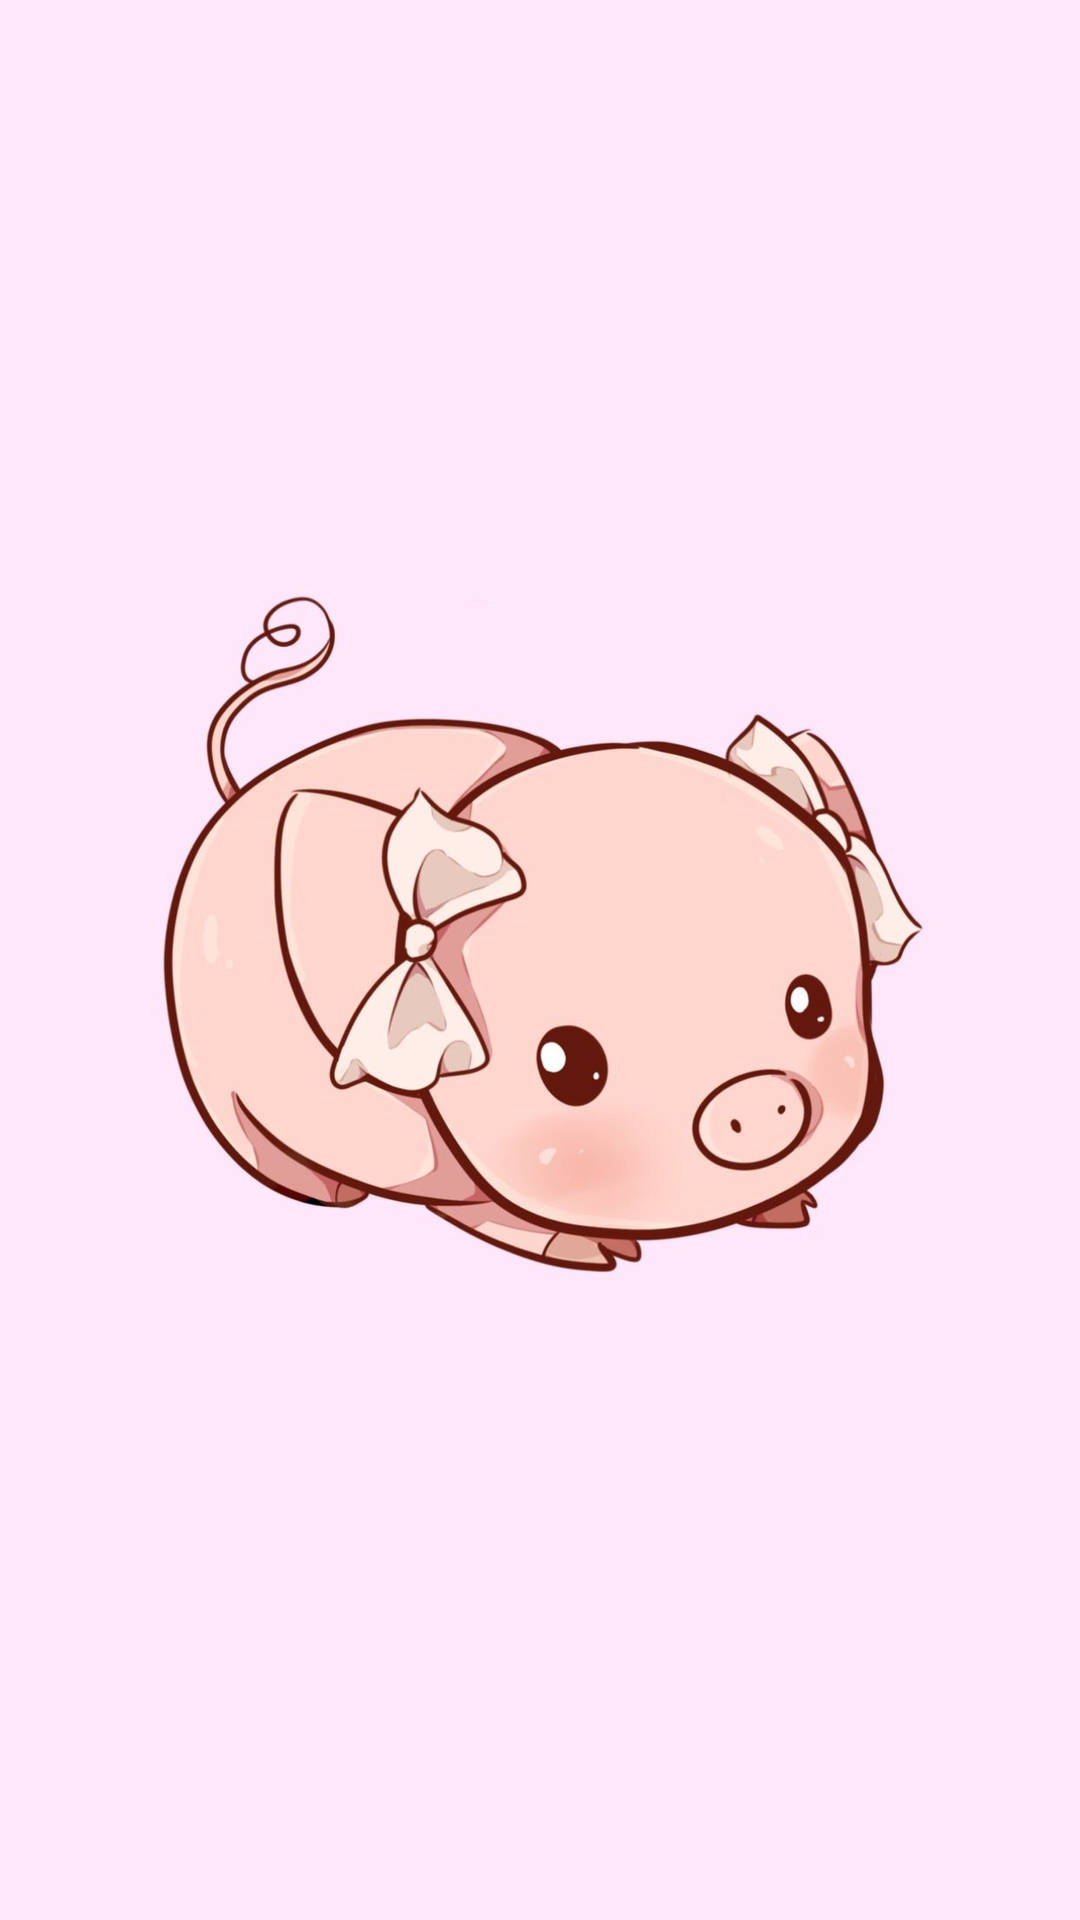 Cute Pig With Pink Bow Wallpaper